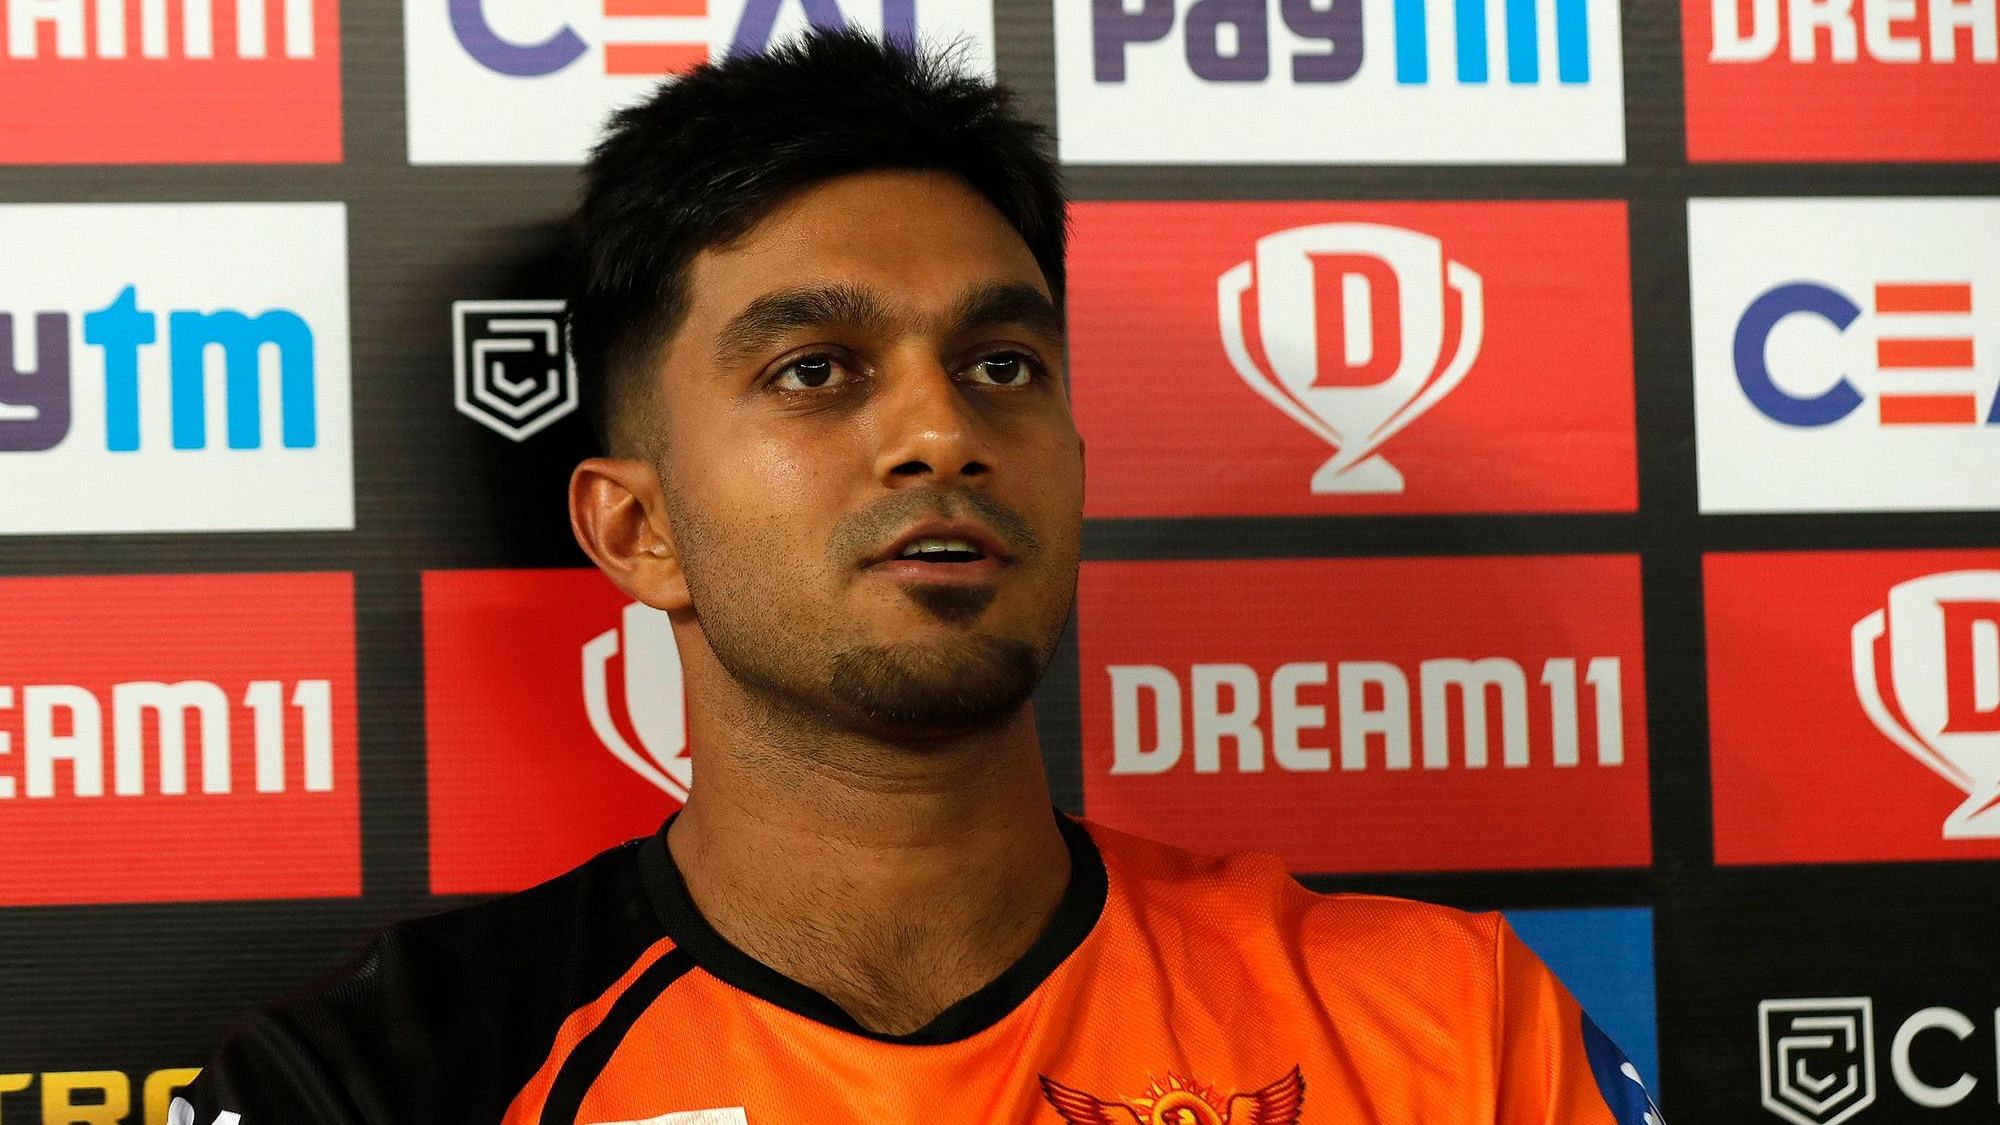 Sunrisers Hyderabad all-rounder Vijay Shankar said that it was good for him to get time in the middle with the bat.